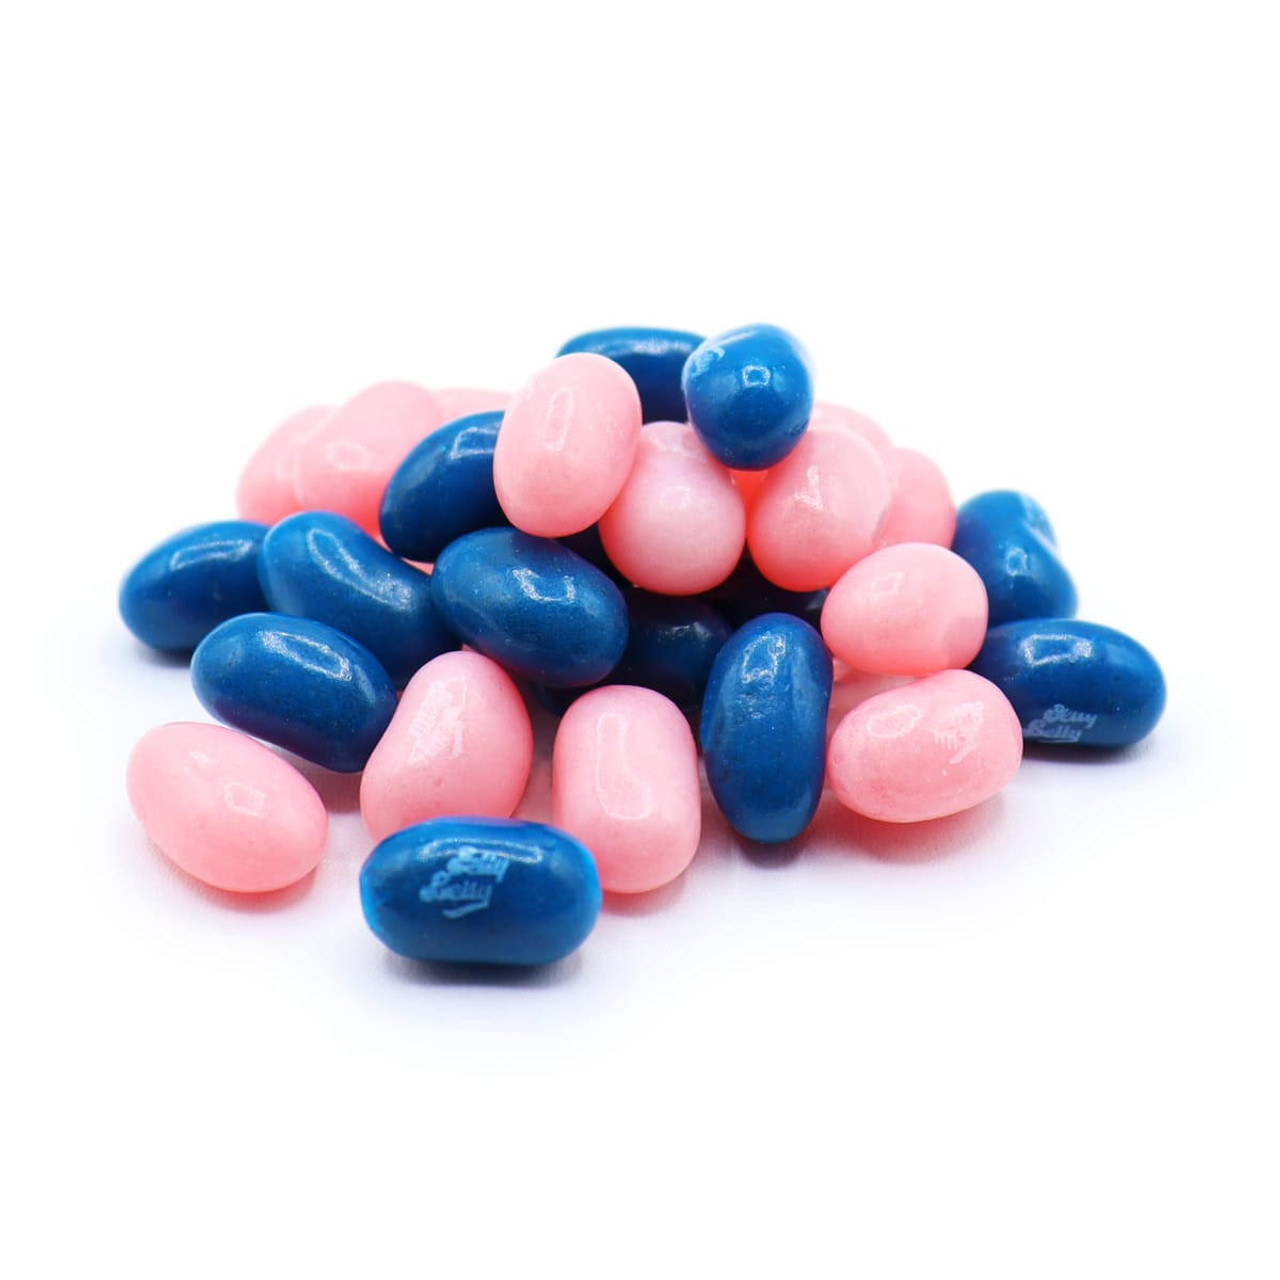 A2ZCHEF Jelly Belly, Blueberry Bubble Gum (Jelly Beans) - 20 lb 